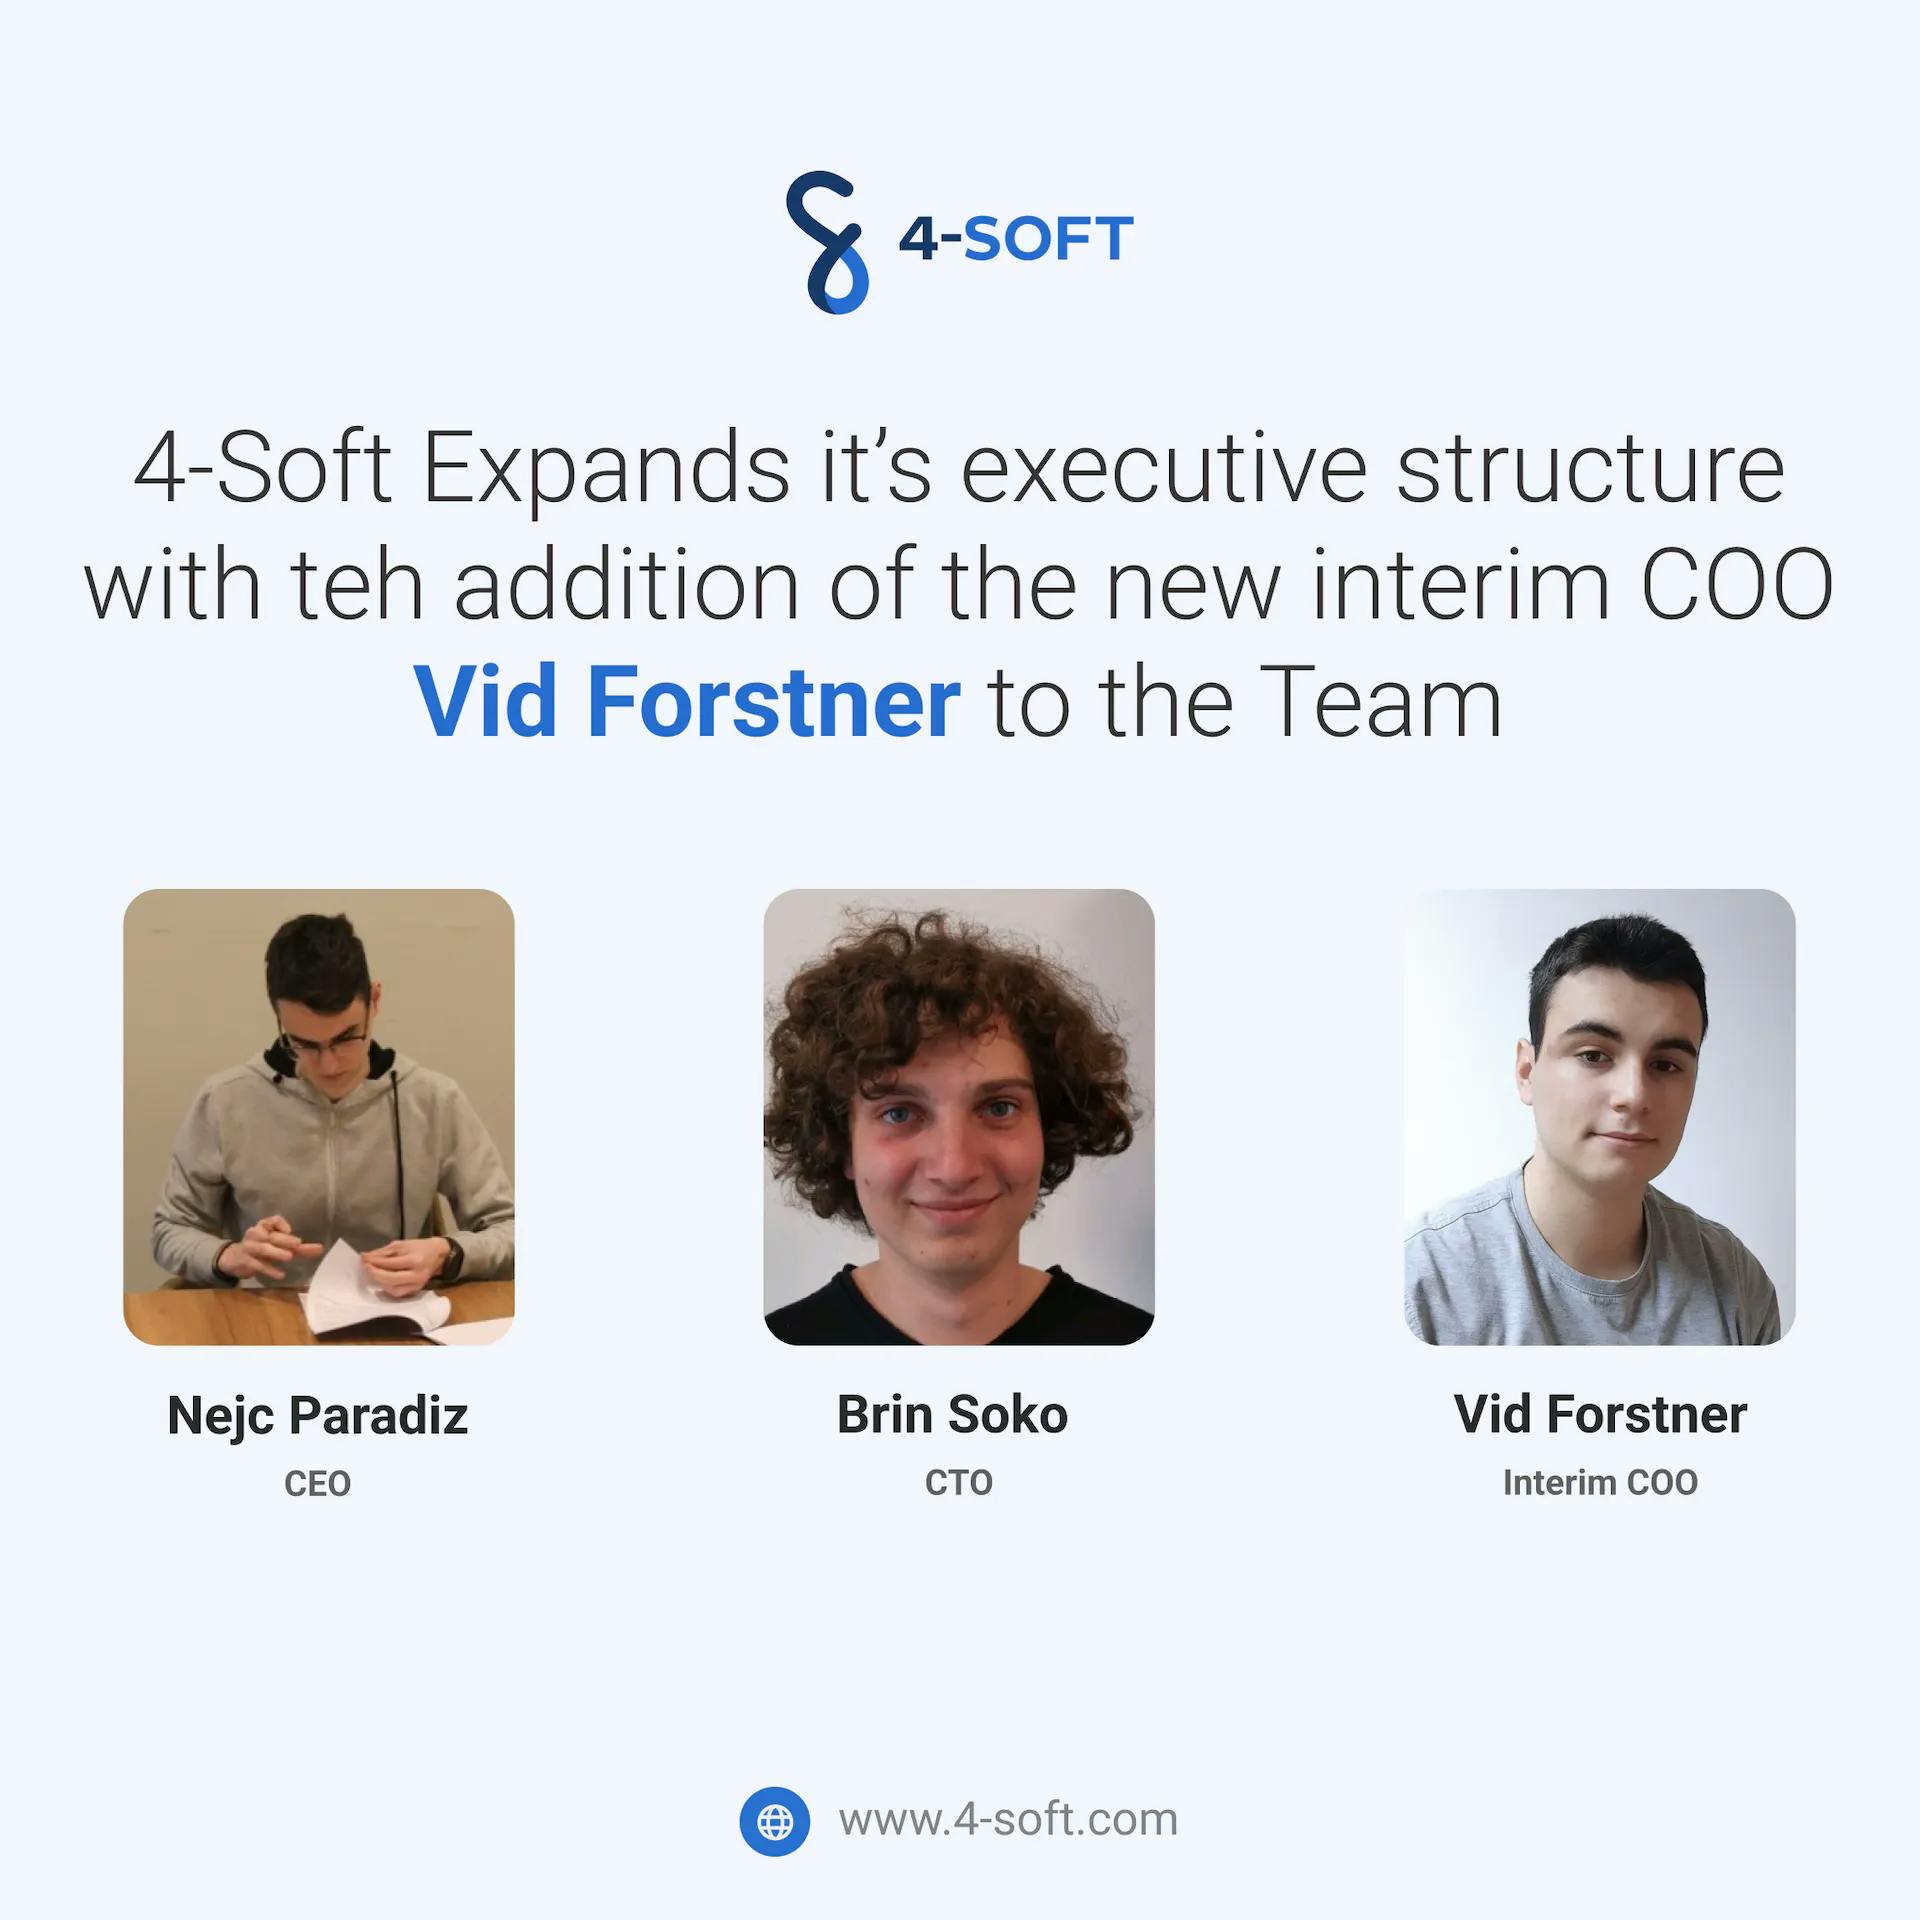 4-Soft welcomes Vid Forstner as Interim COO.